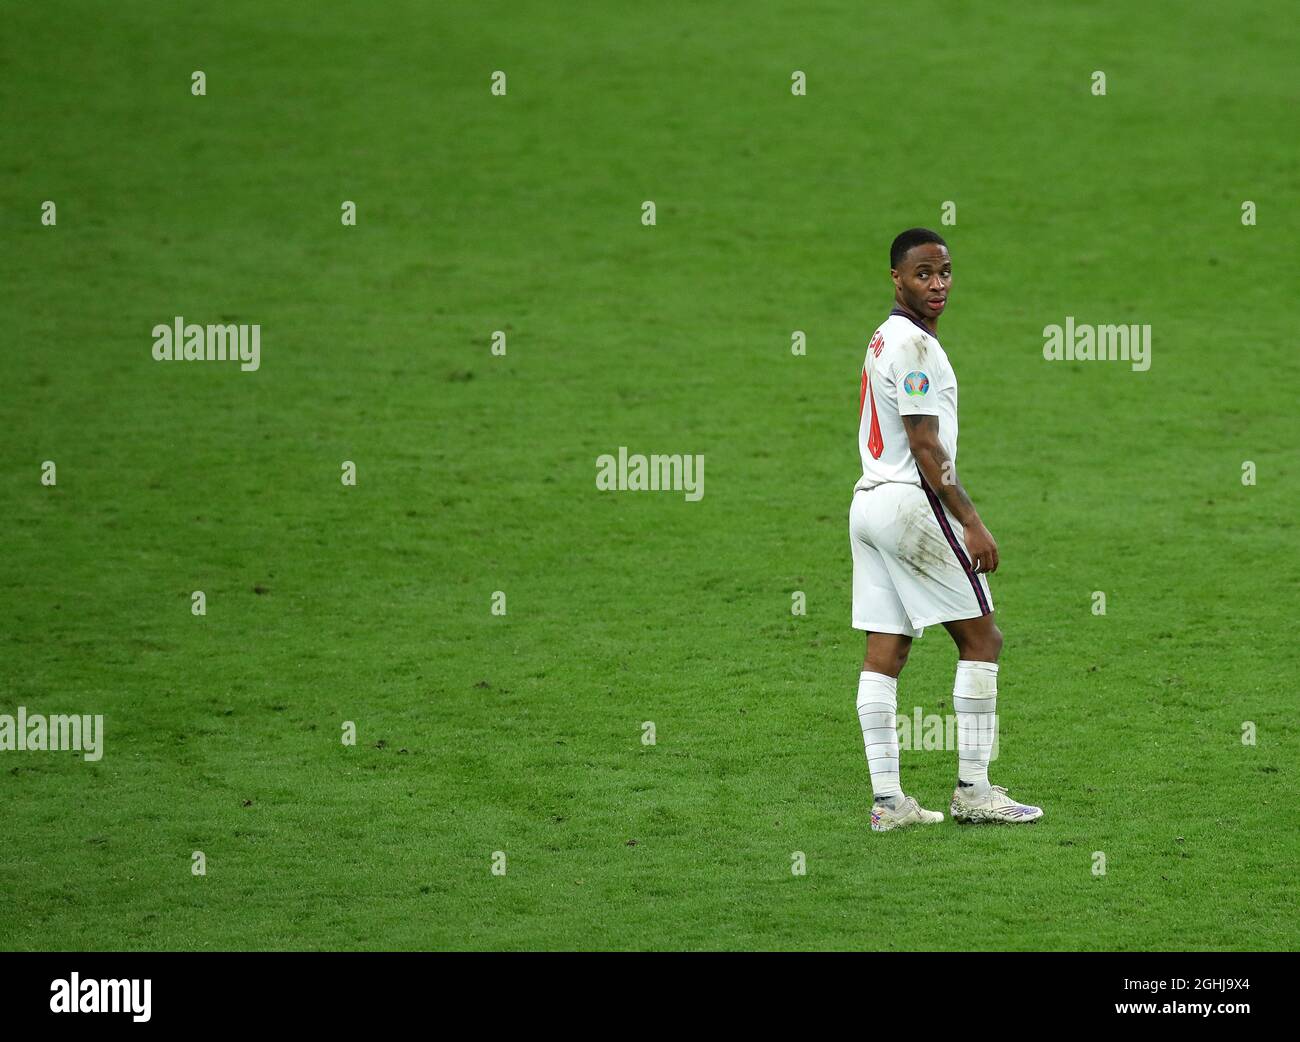 London, England, 11th July 2021. Raheem Sterling of England during the UEFA European Championships final match at Wembley Stadium, London. Picture credit should read: David Klein / Sportimage via PA Images Stock Photo